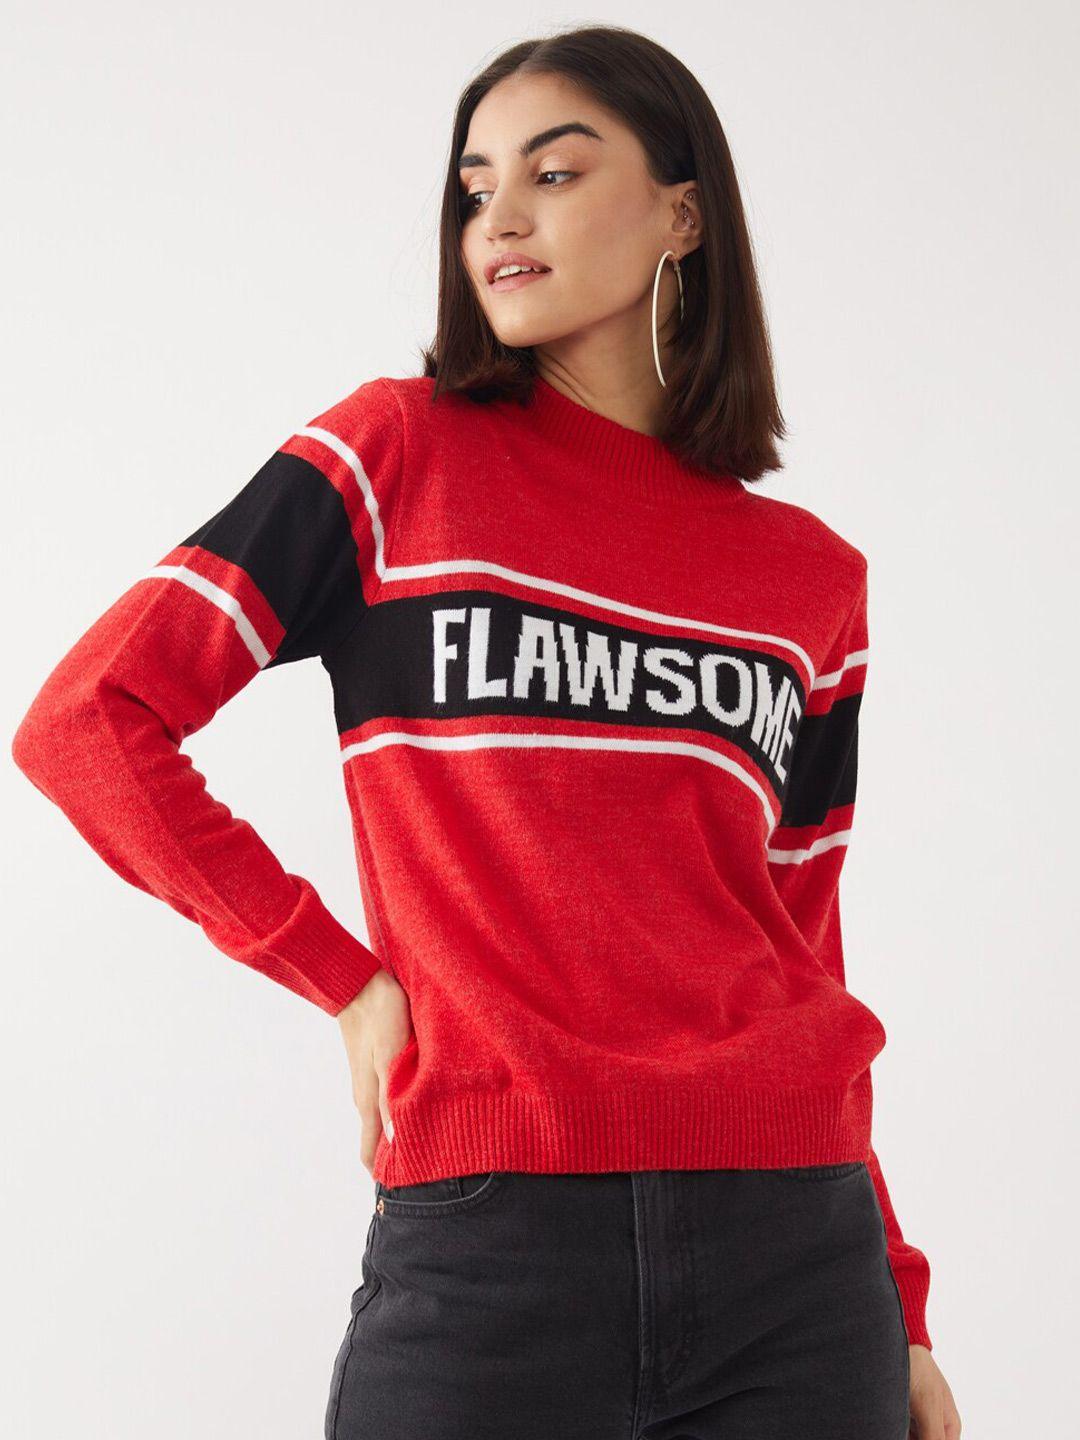 zink-london-women-red-&-black-typography-printed-pure-acrylic-pullover